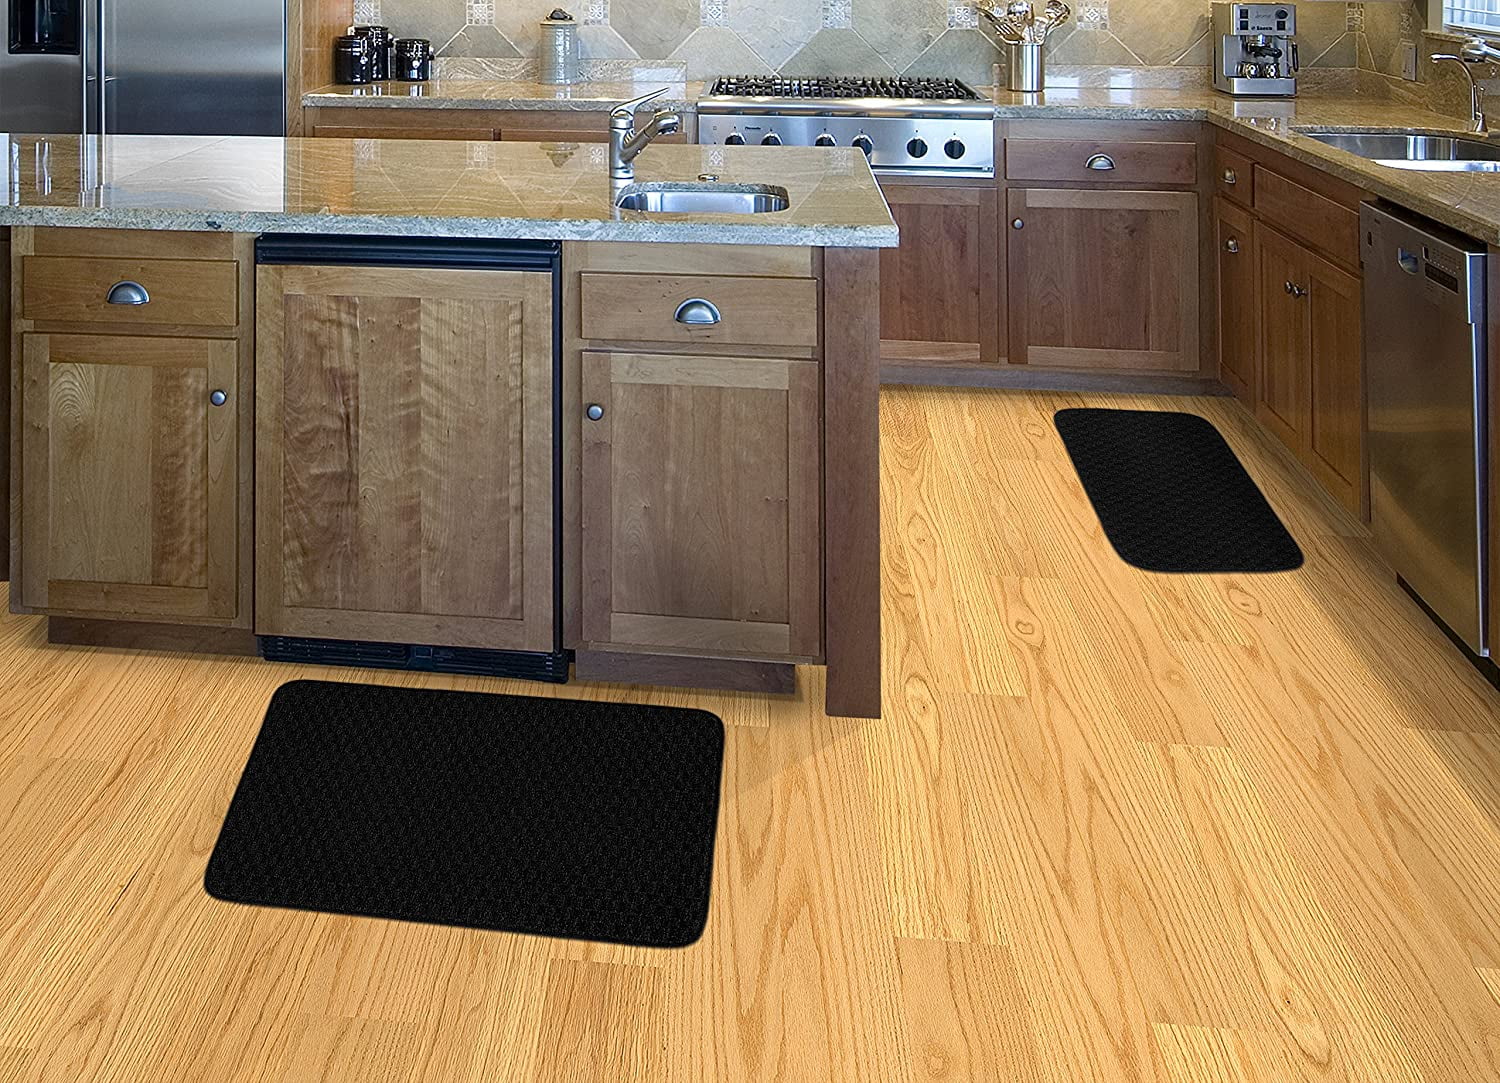 Easy To Clean Washable Kitchen Rug W Skid Resistant Rubber Backing 2 Pack Walmartcom Walmartcom